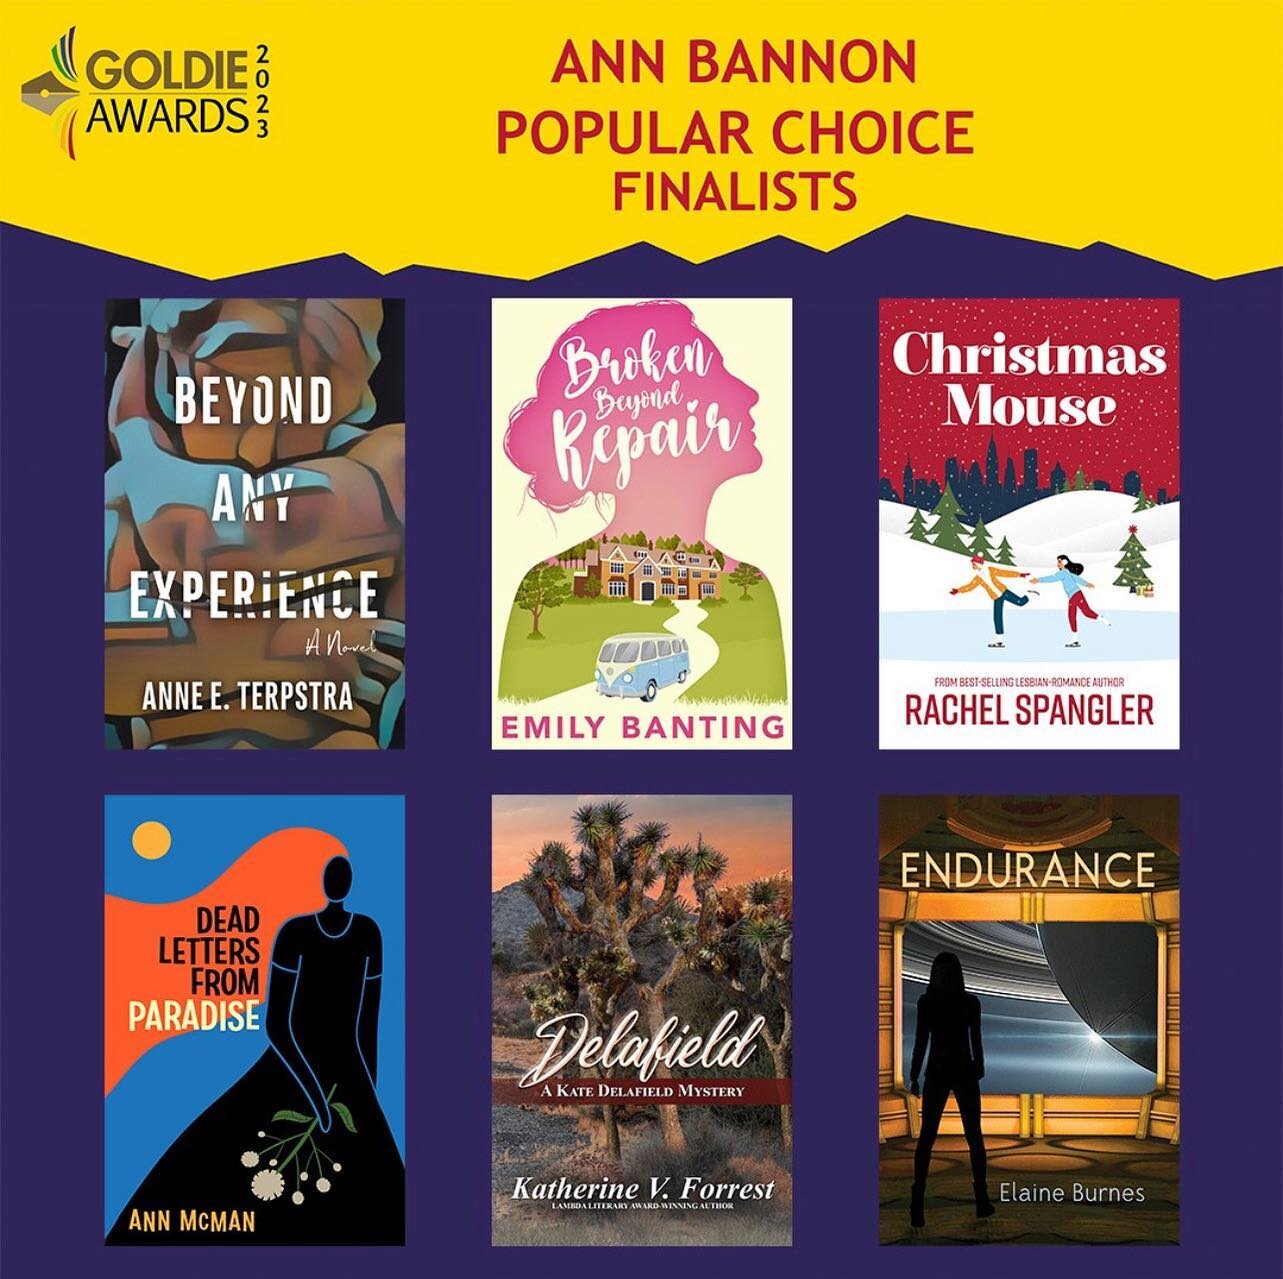 I was so pleased to find out that my novel, Beyond Any Experience, was a finalist for the Ann Bannon Popular Choice Award for this year&rsquo;s GCLS Goldies.

For those not familiar, the Popular Choice Award winners are decided by readers&rsquo; vote